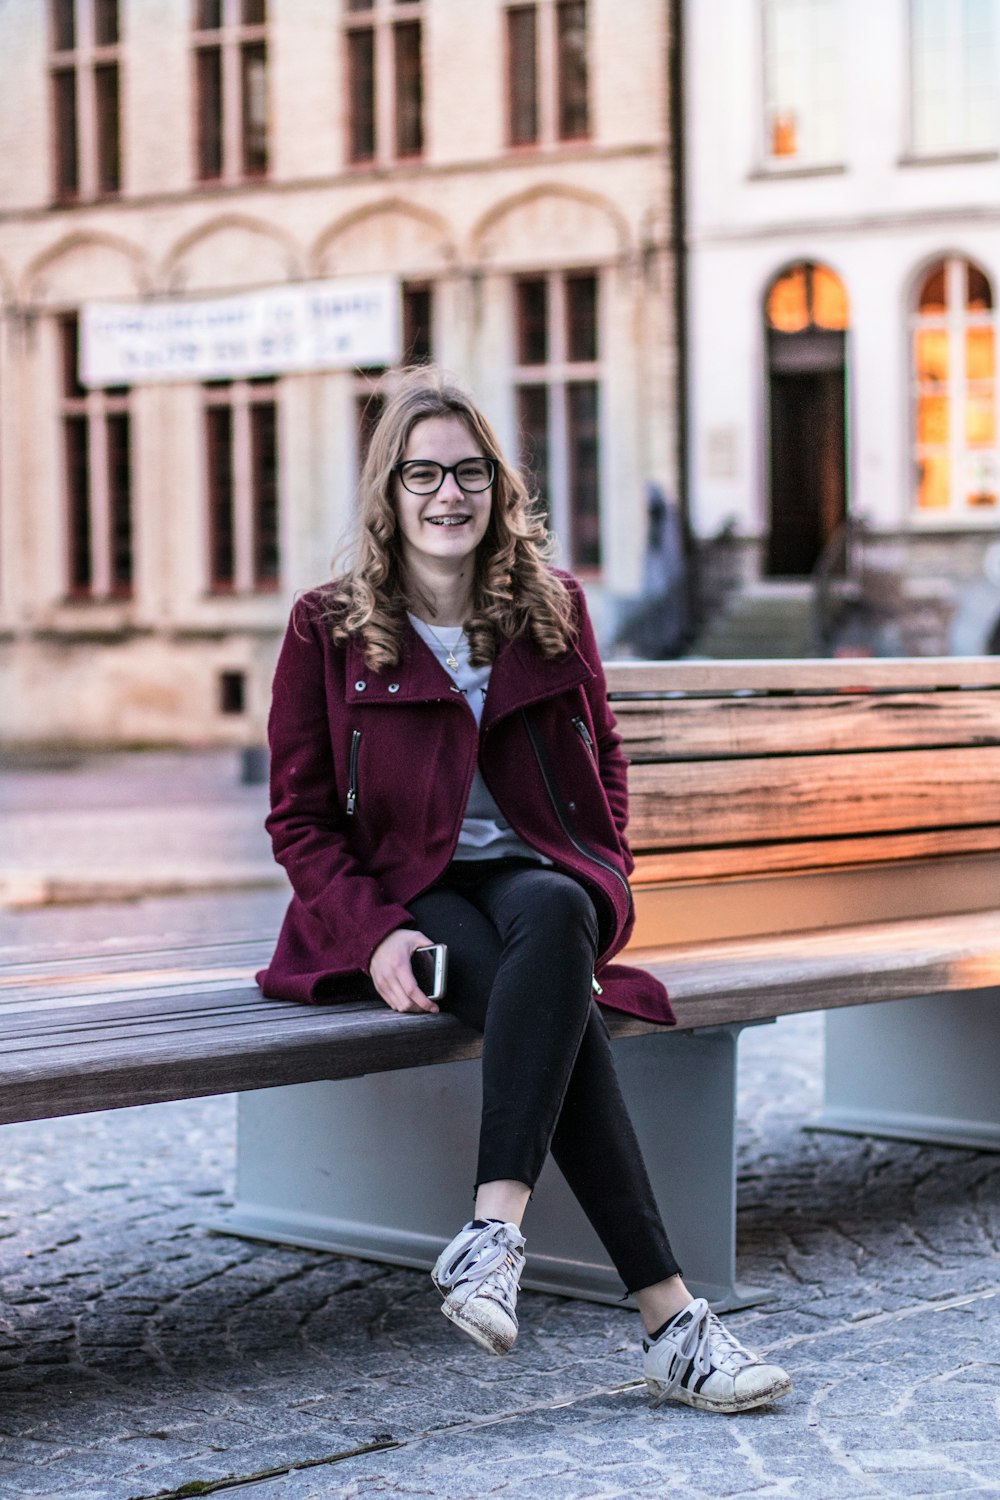 smiling woman sitting on bench